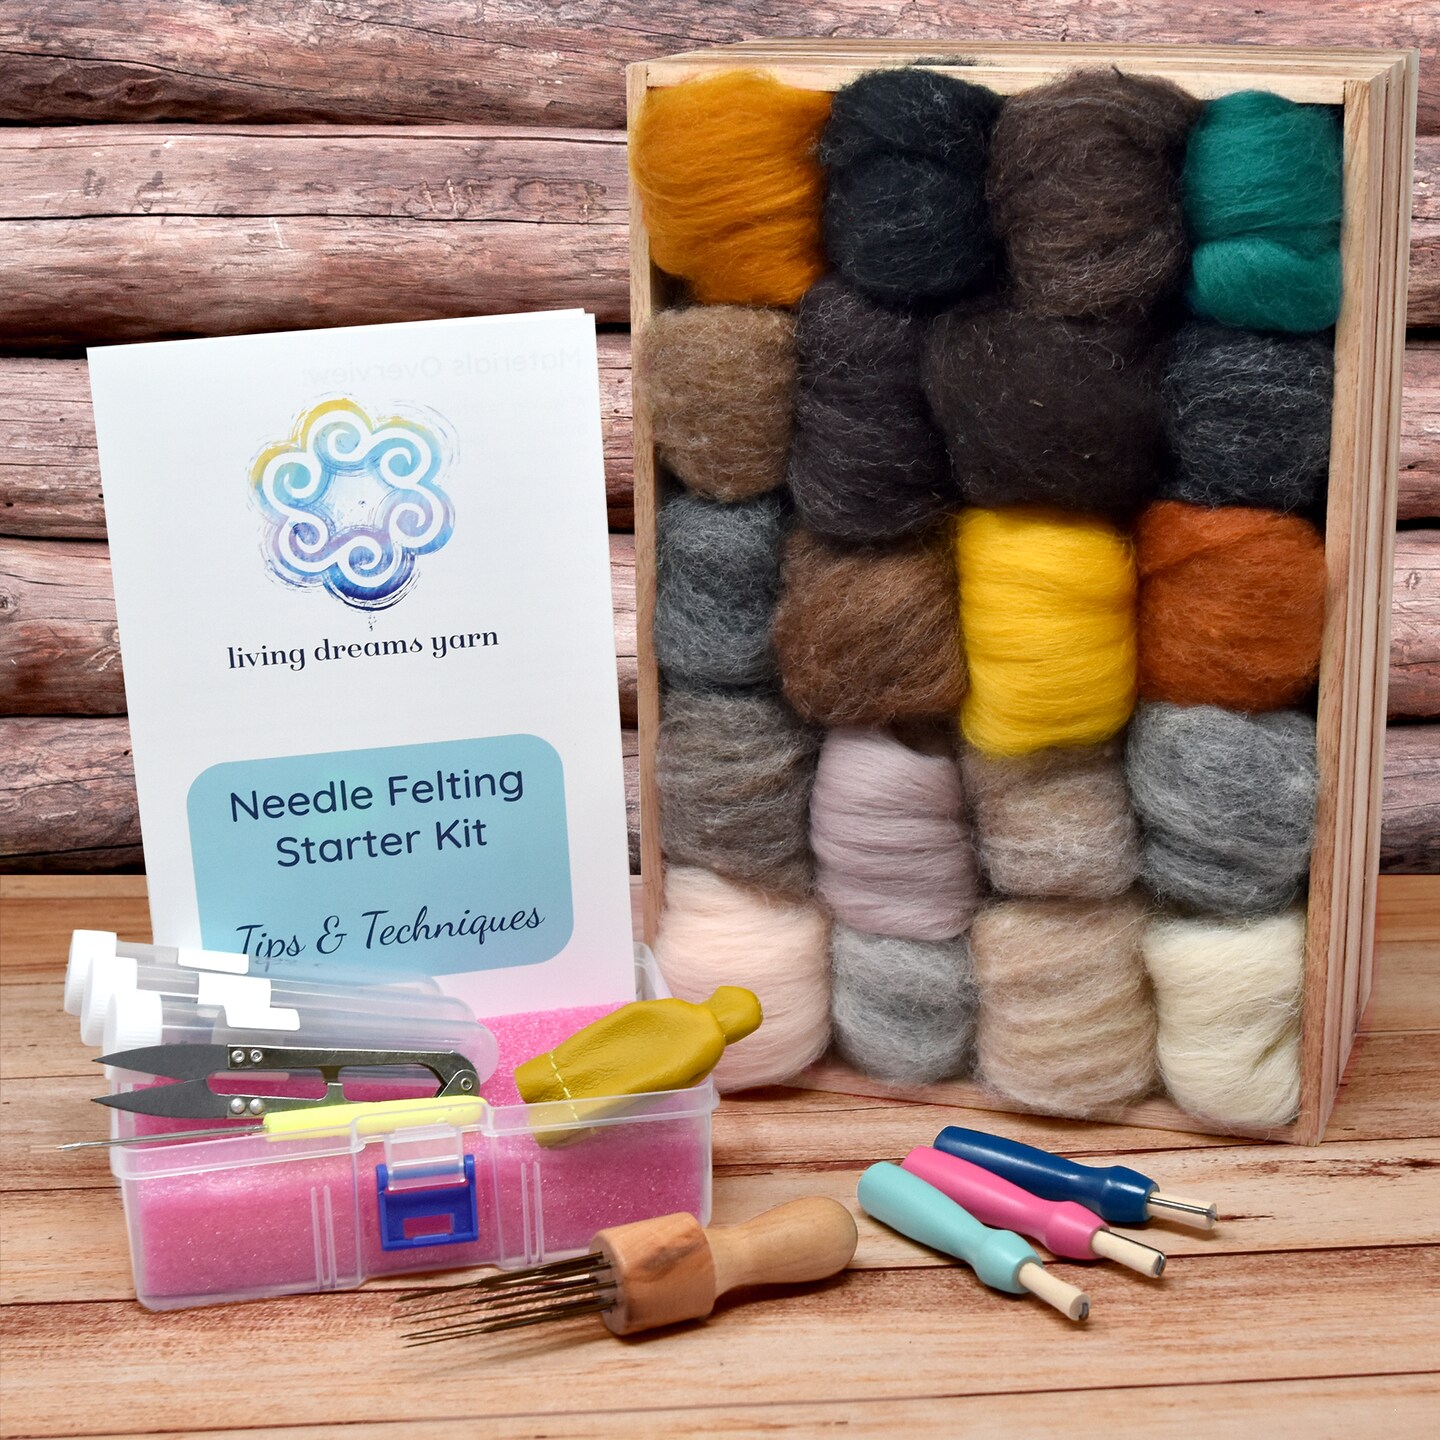 Living Dreams Premium Needle Felting Starter Kit Includes 20 Critter Colored Wool, 50 Needles and Tools, Text and Video Guide. Craft Kit for Beginners, Kids and Adults